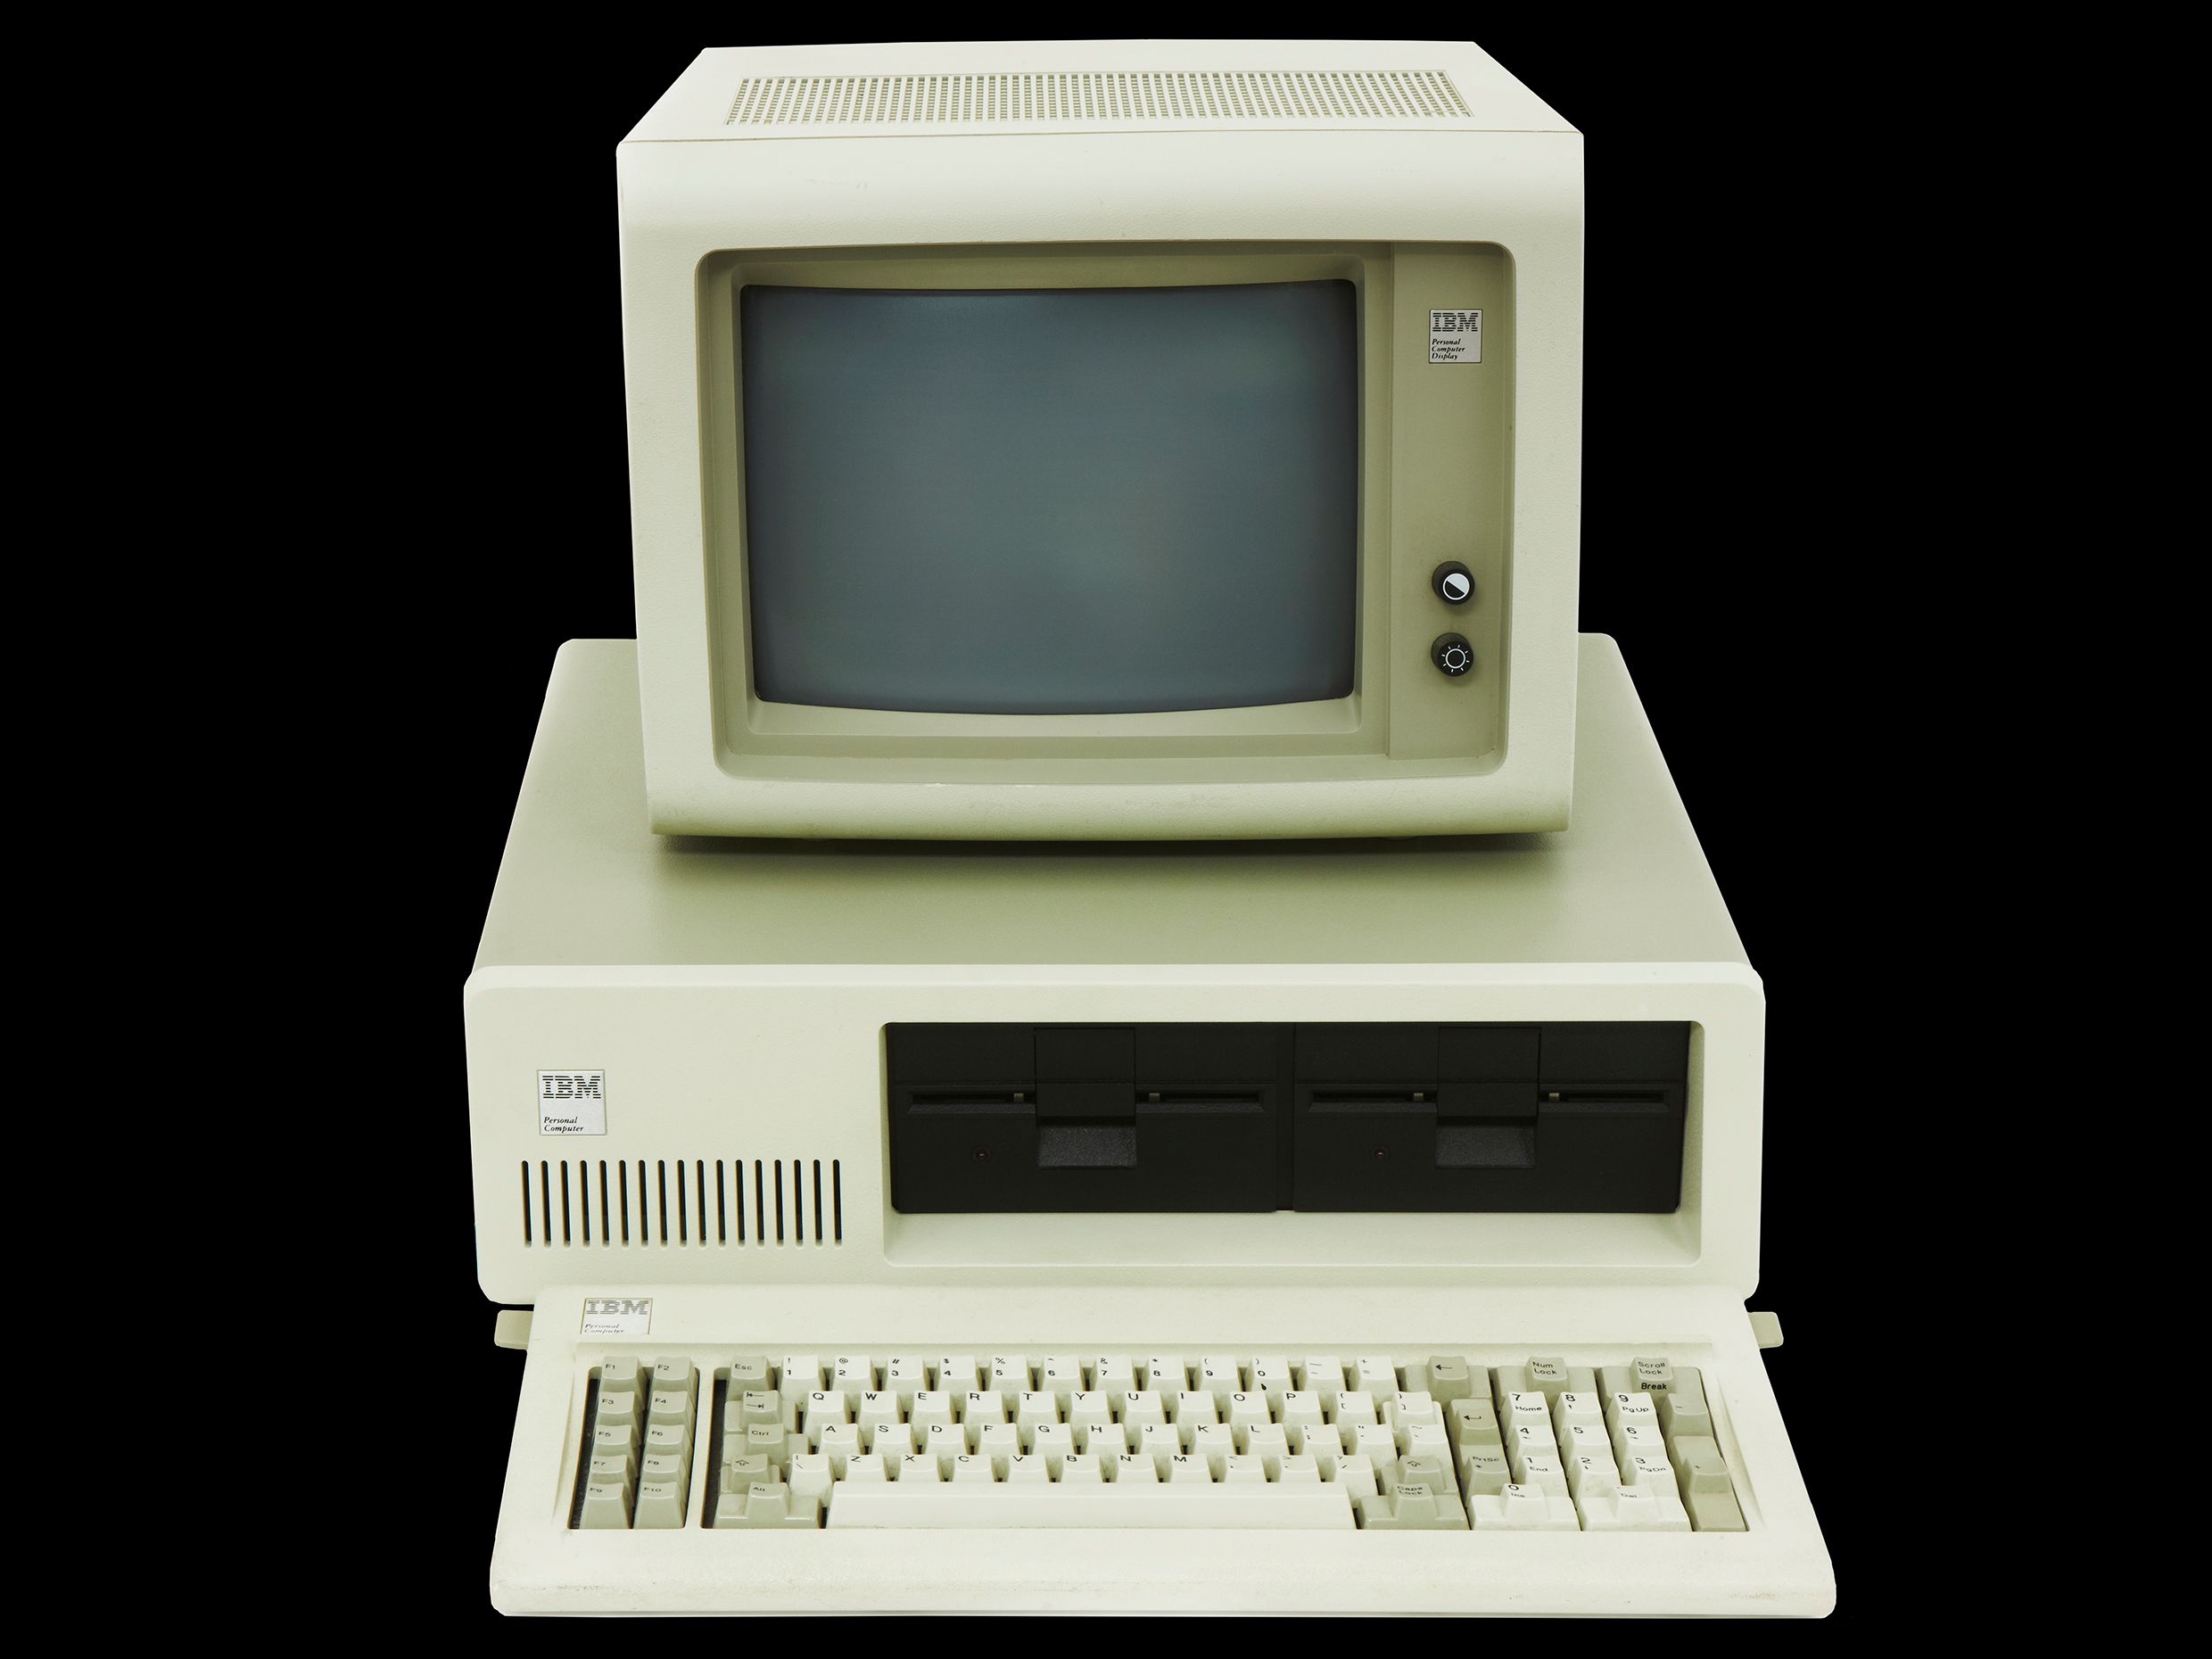 The IBM PC, introduced in August 1981